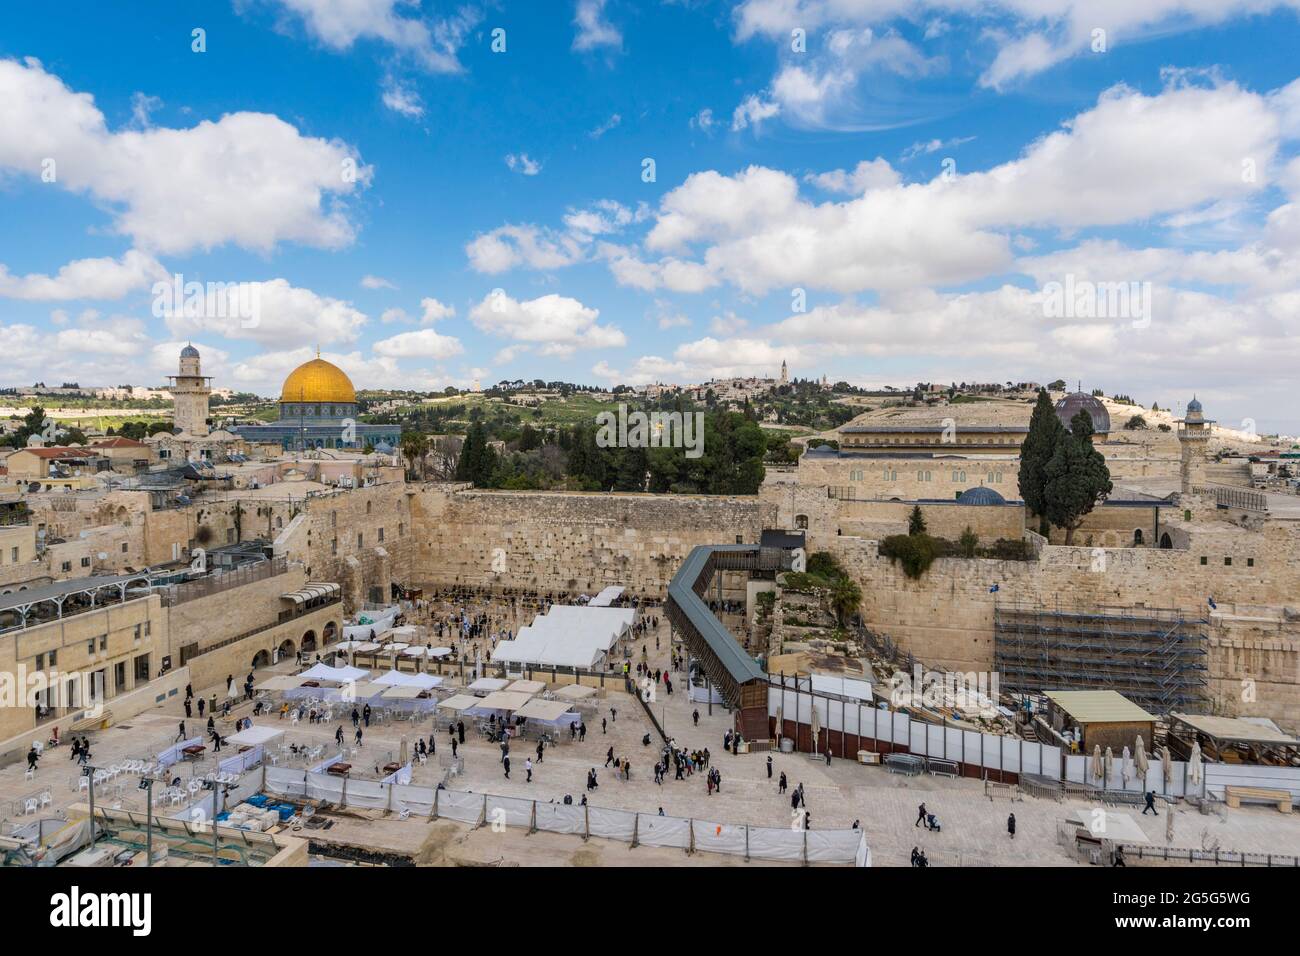 Jerusalem, Israel. The Western Wall, one of the holliest places for Judaism, also known as the 'Wailling wall', was equipped with barriers and dividers to seperate people praying during the Covid-19 pandemic. Stock Photo